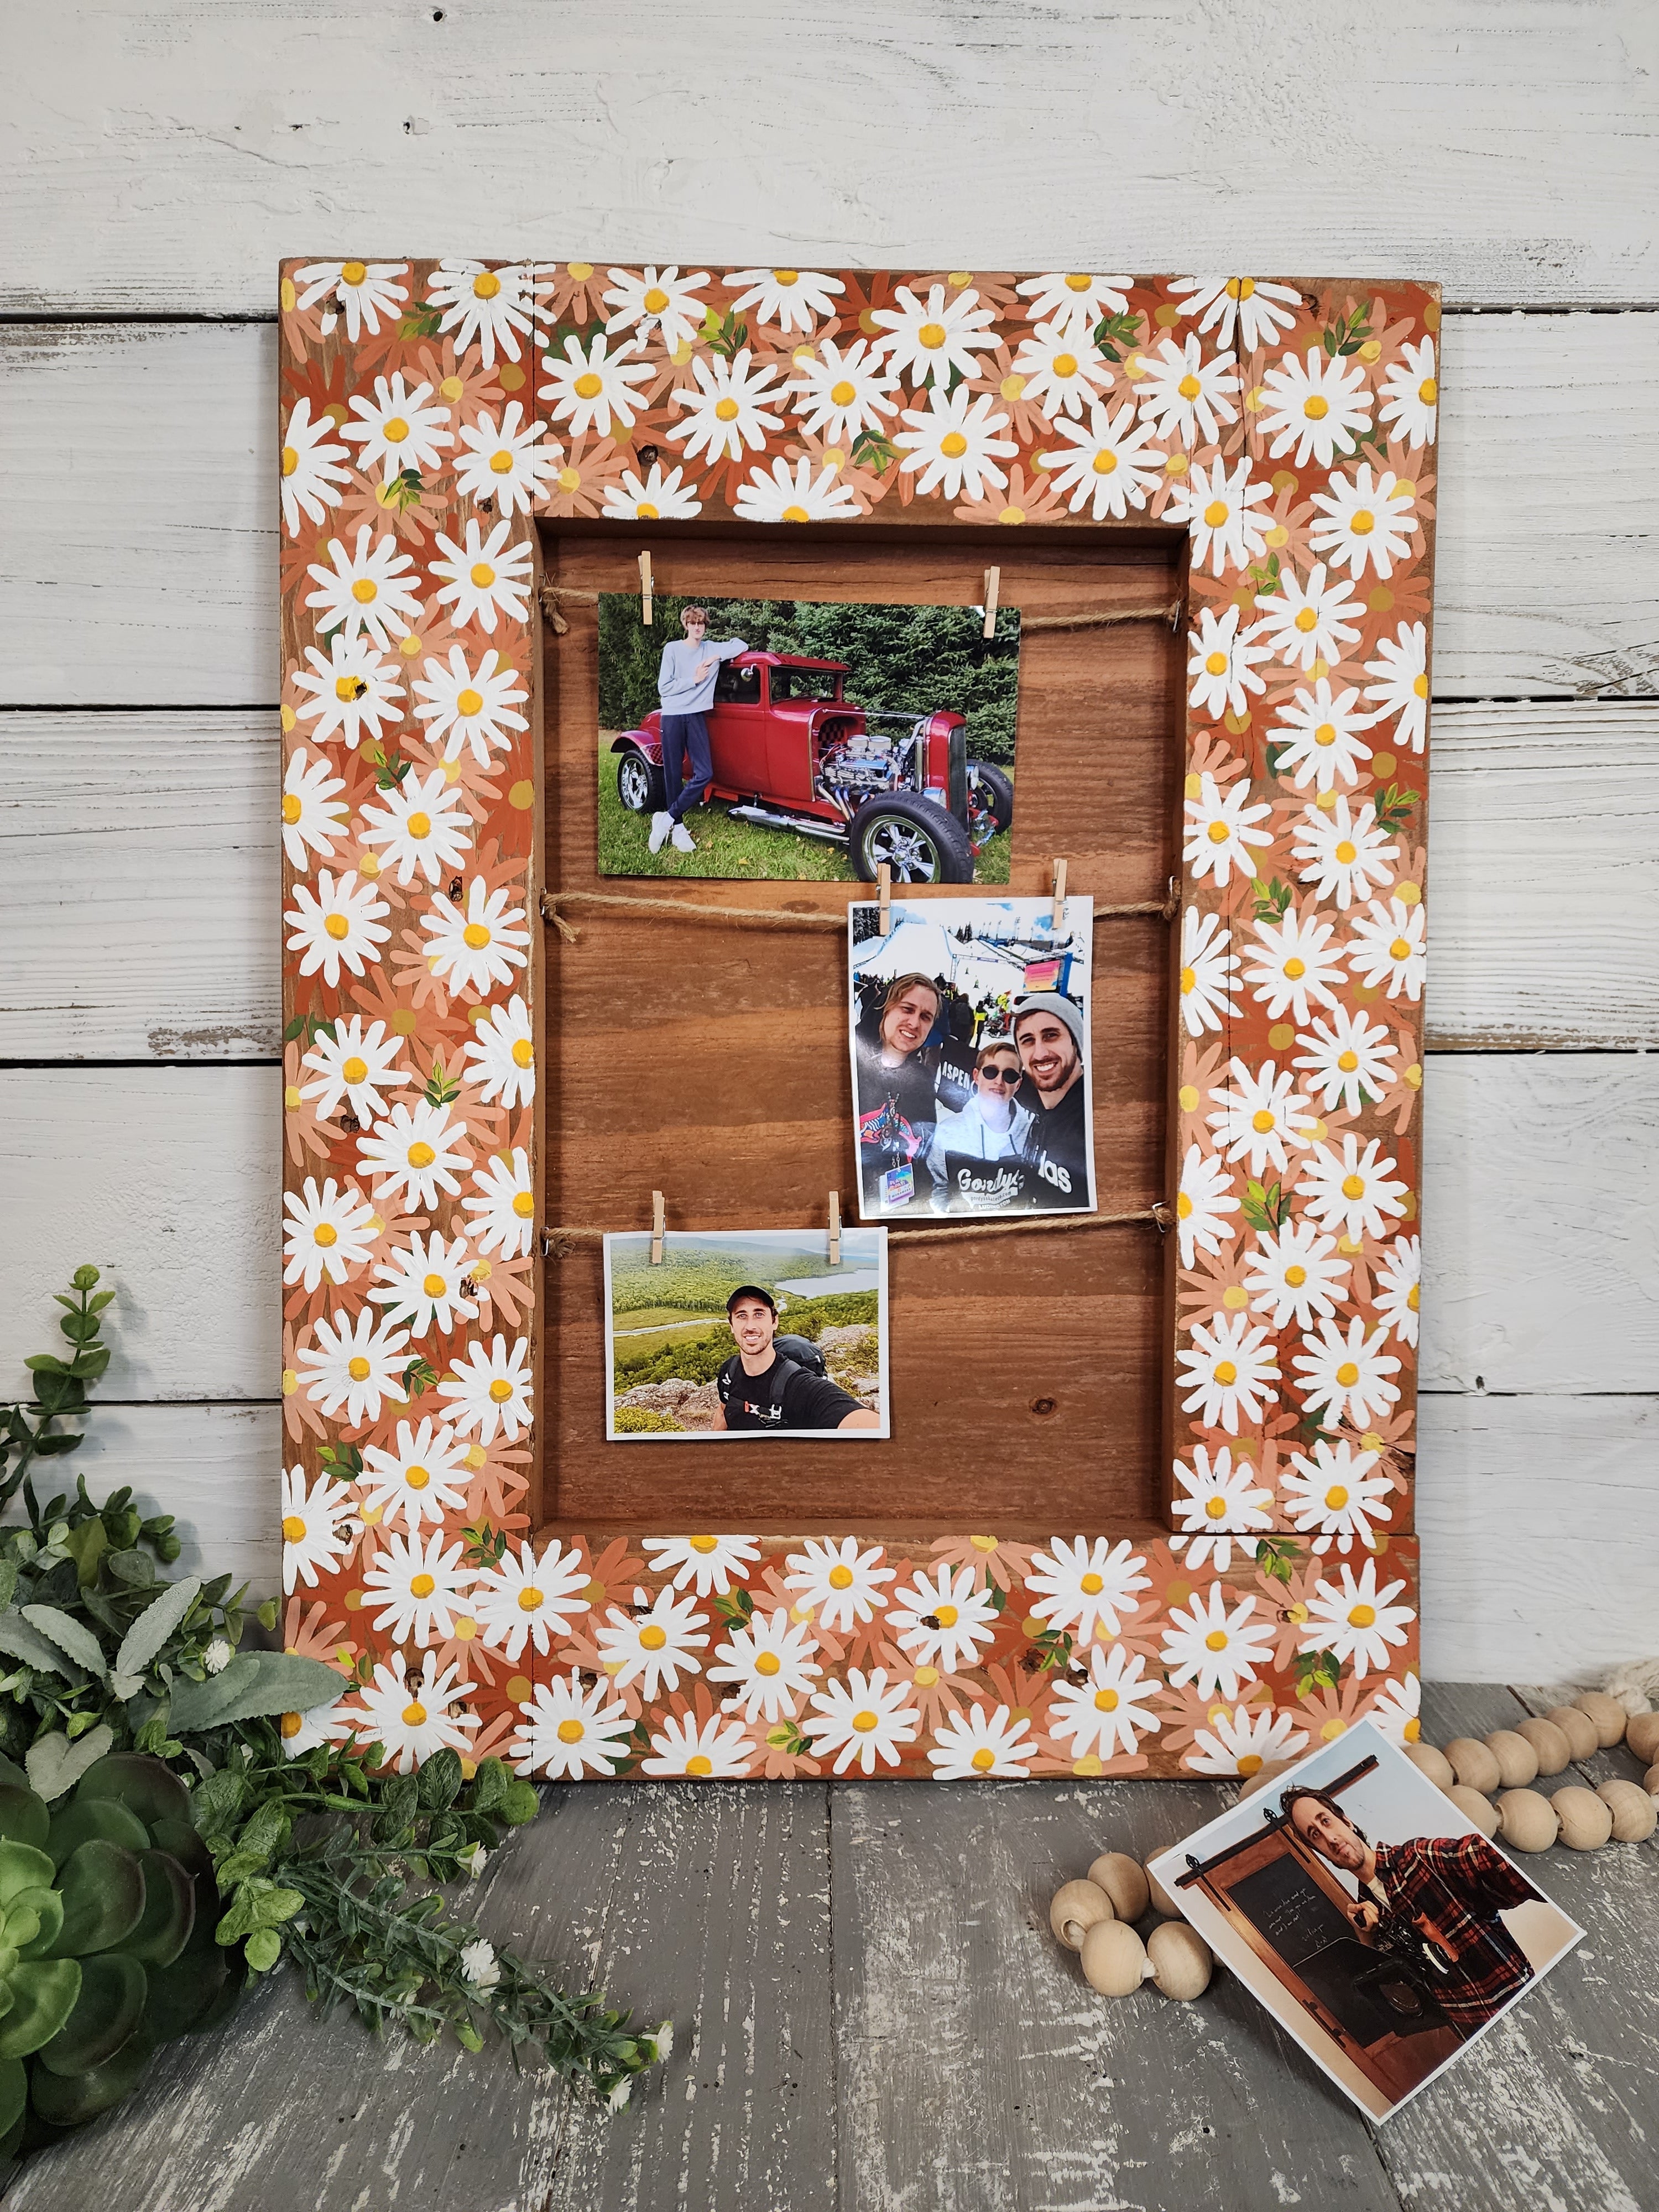 Peach Daisy Handpainted Acrylic floral frame, orange summer decor, pallet wood, photo display, picture clips, cottage deck porch artwork